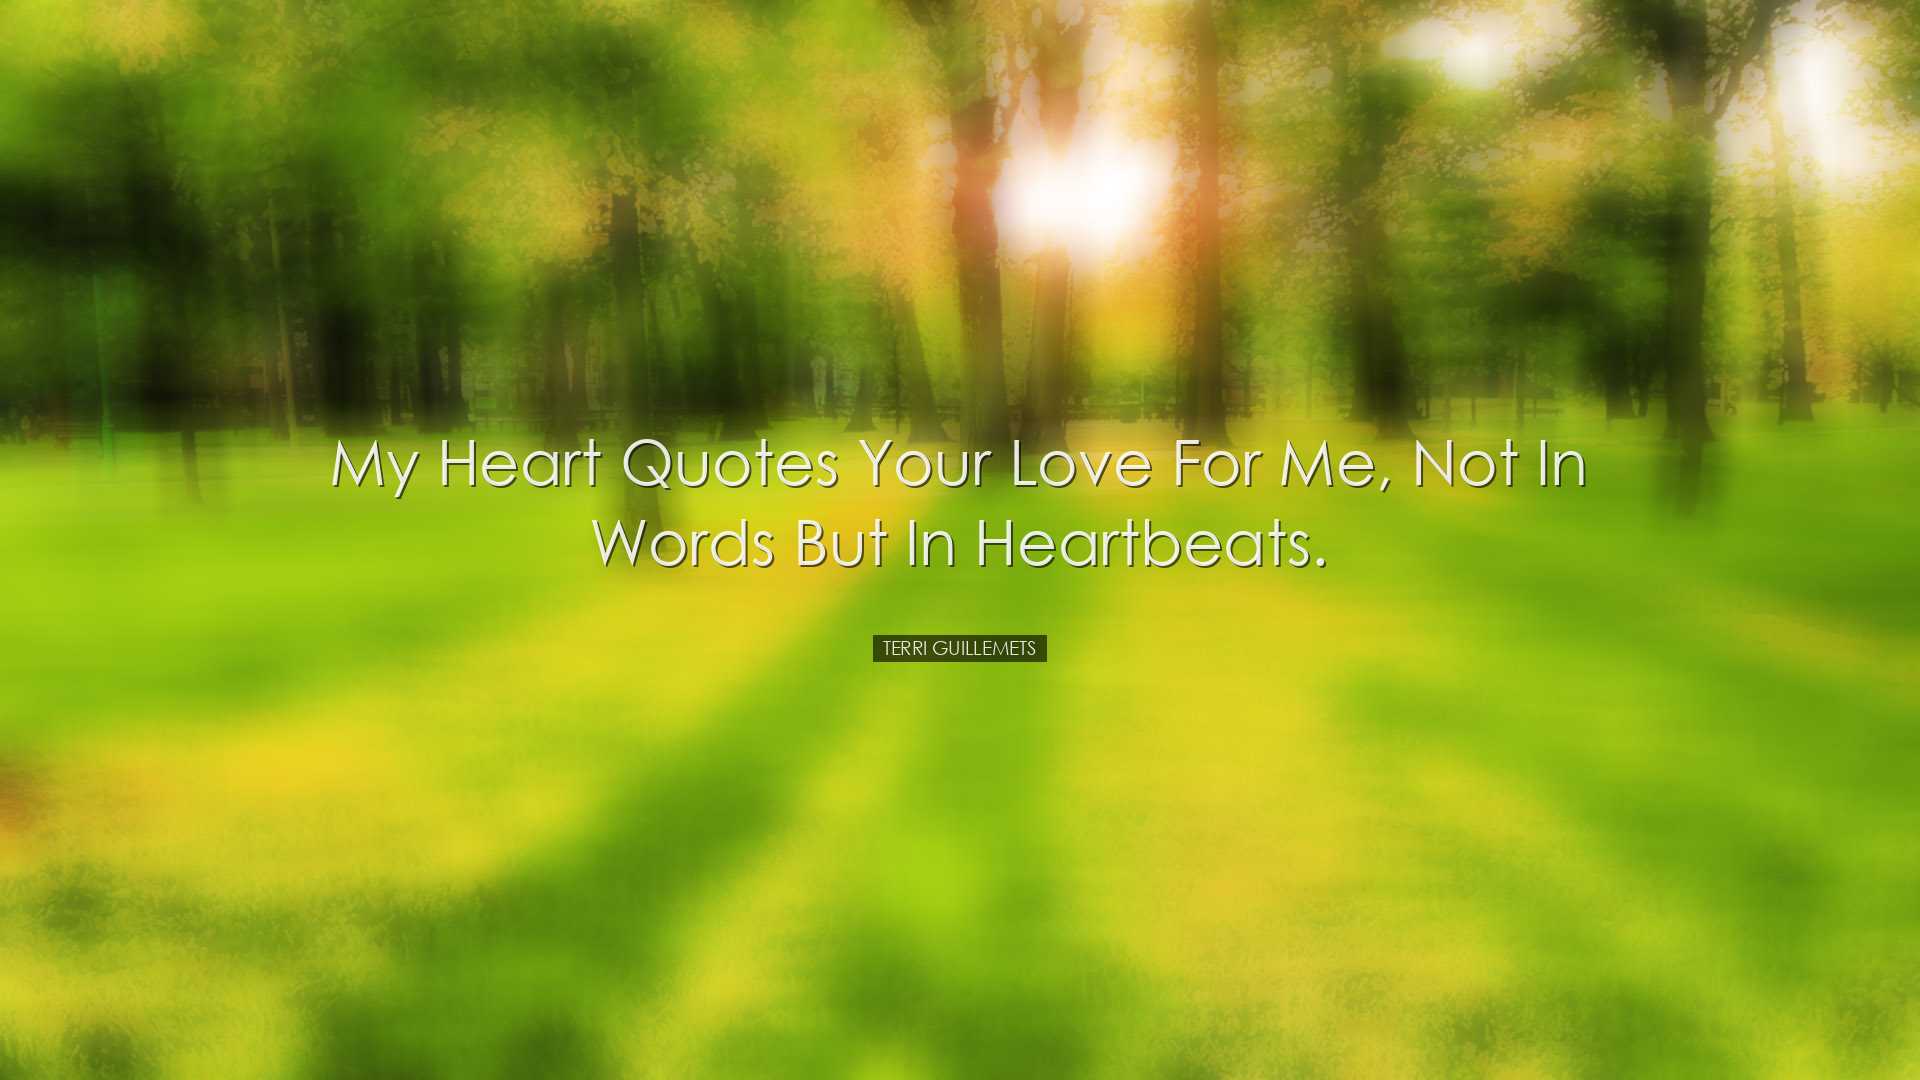 My heart quotes your love for me, not in words but in heartbeats.